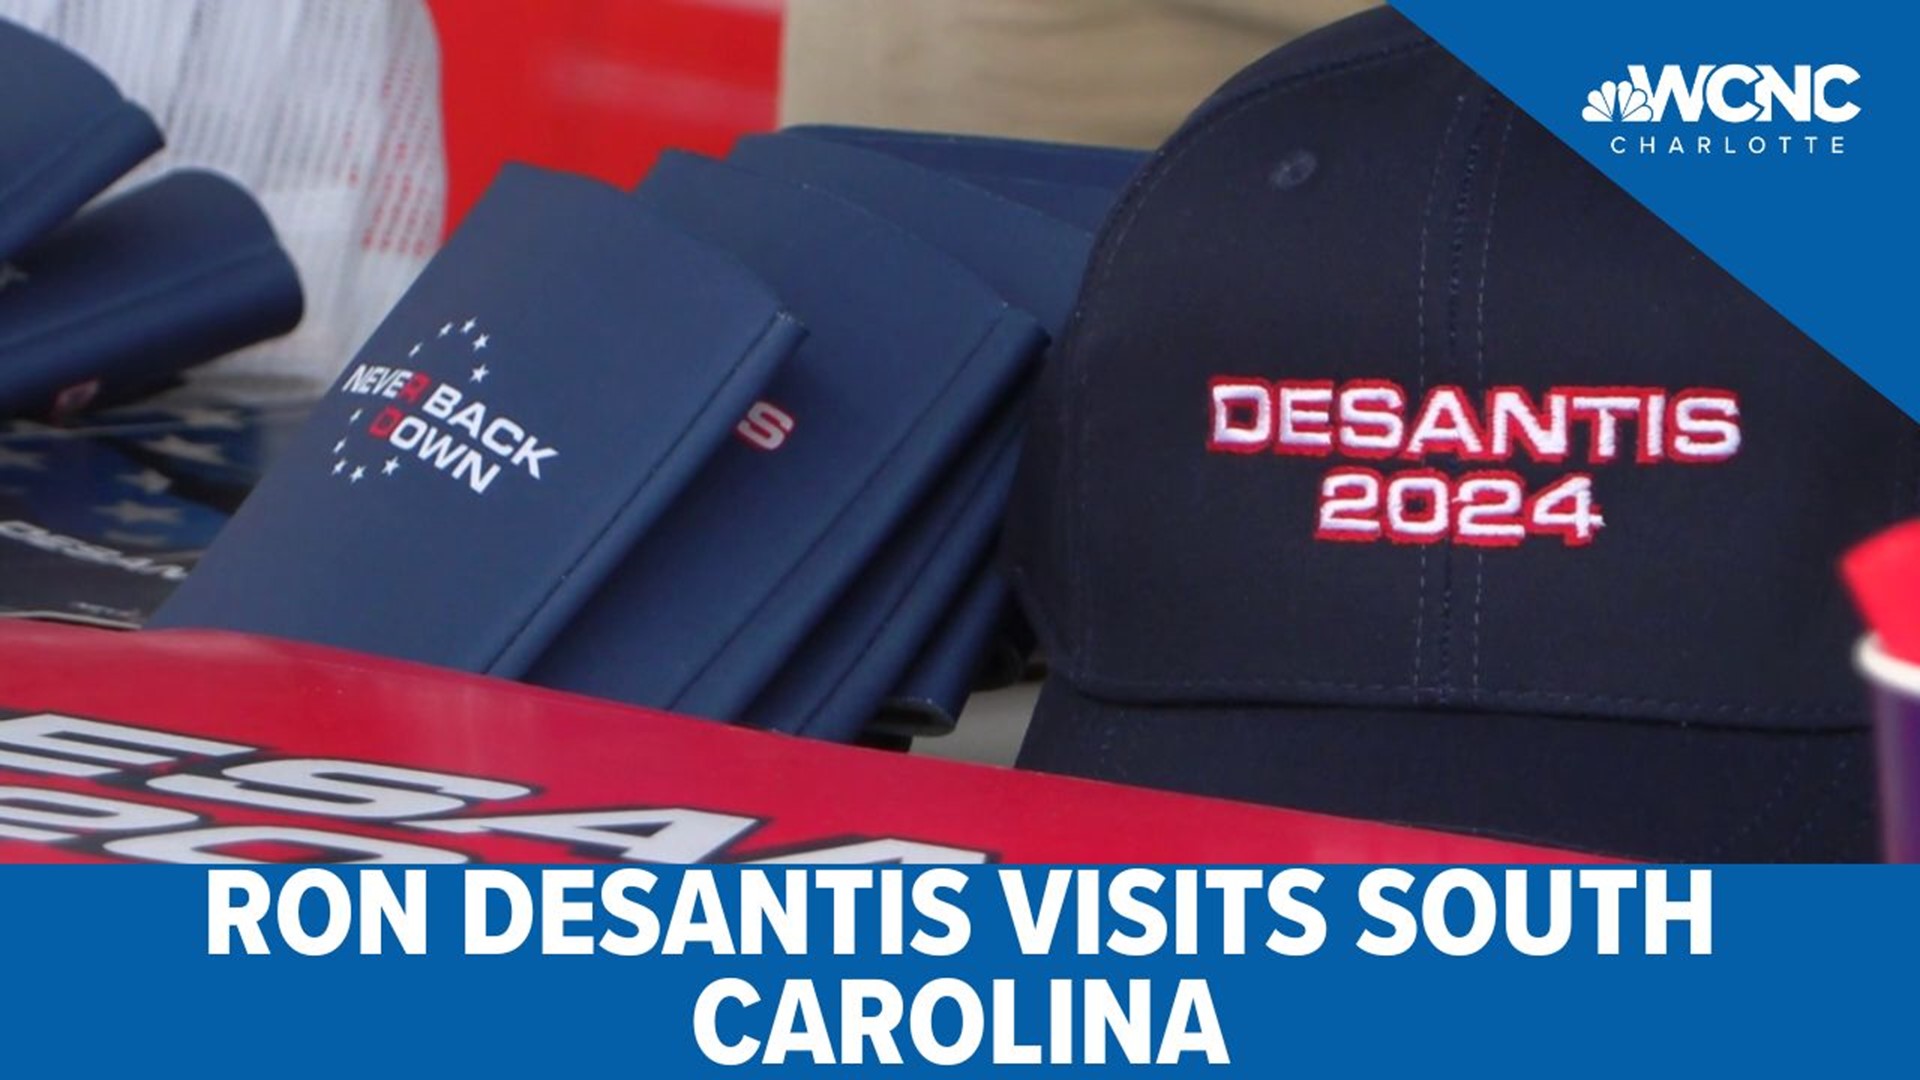 It's his third visit to South Carolina on the campaign trail as he hopes to beat out frontrunner Donald Trump for the Republican nomination in 2024.